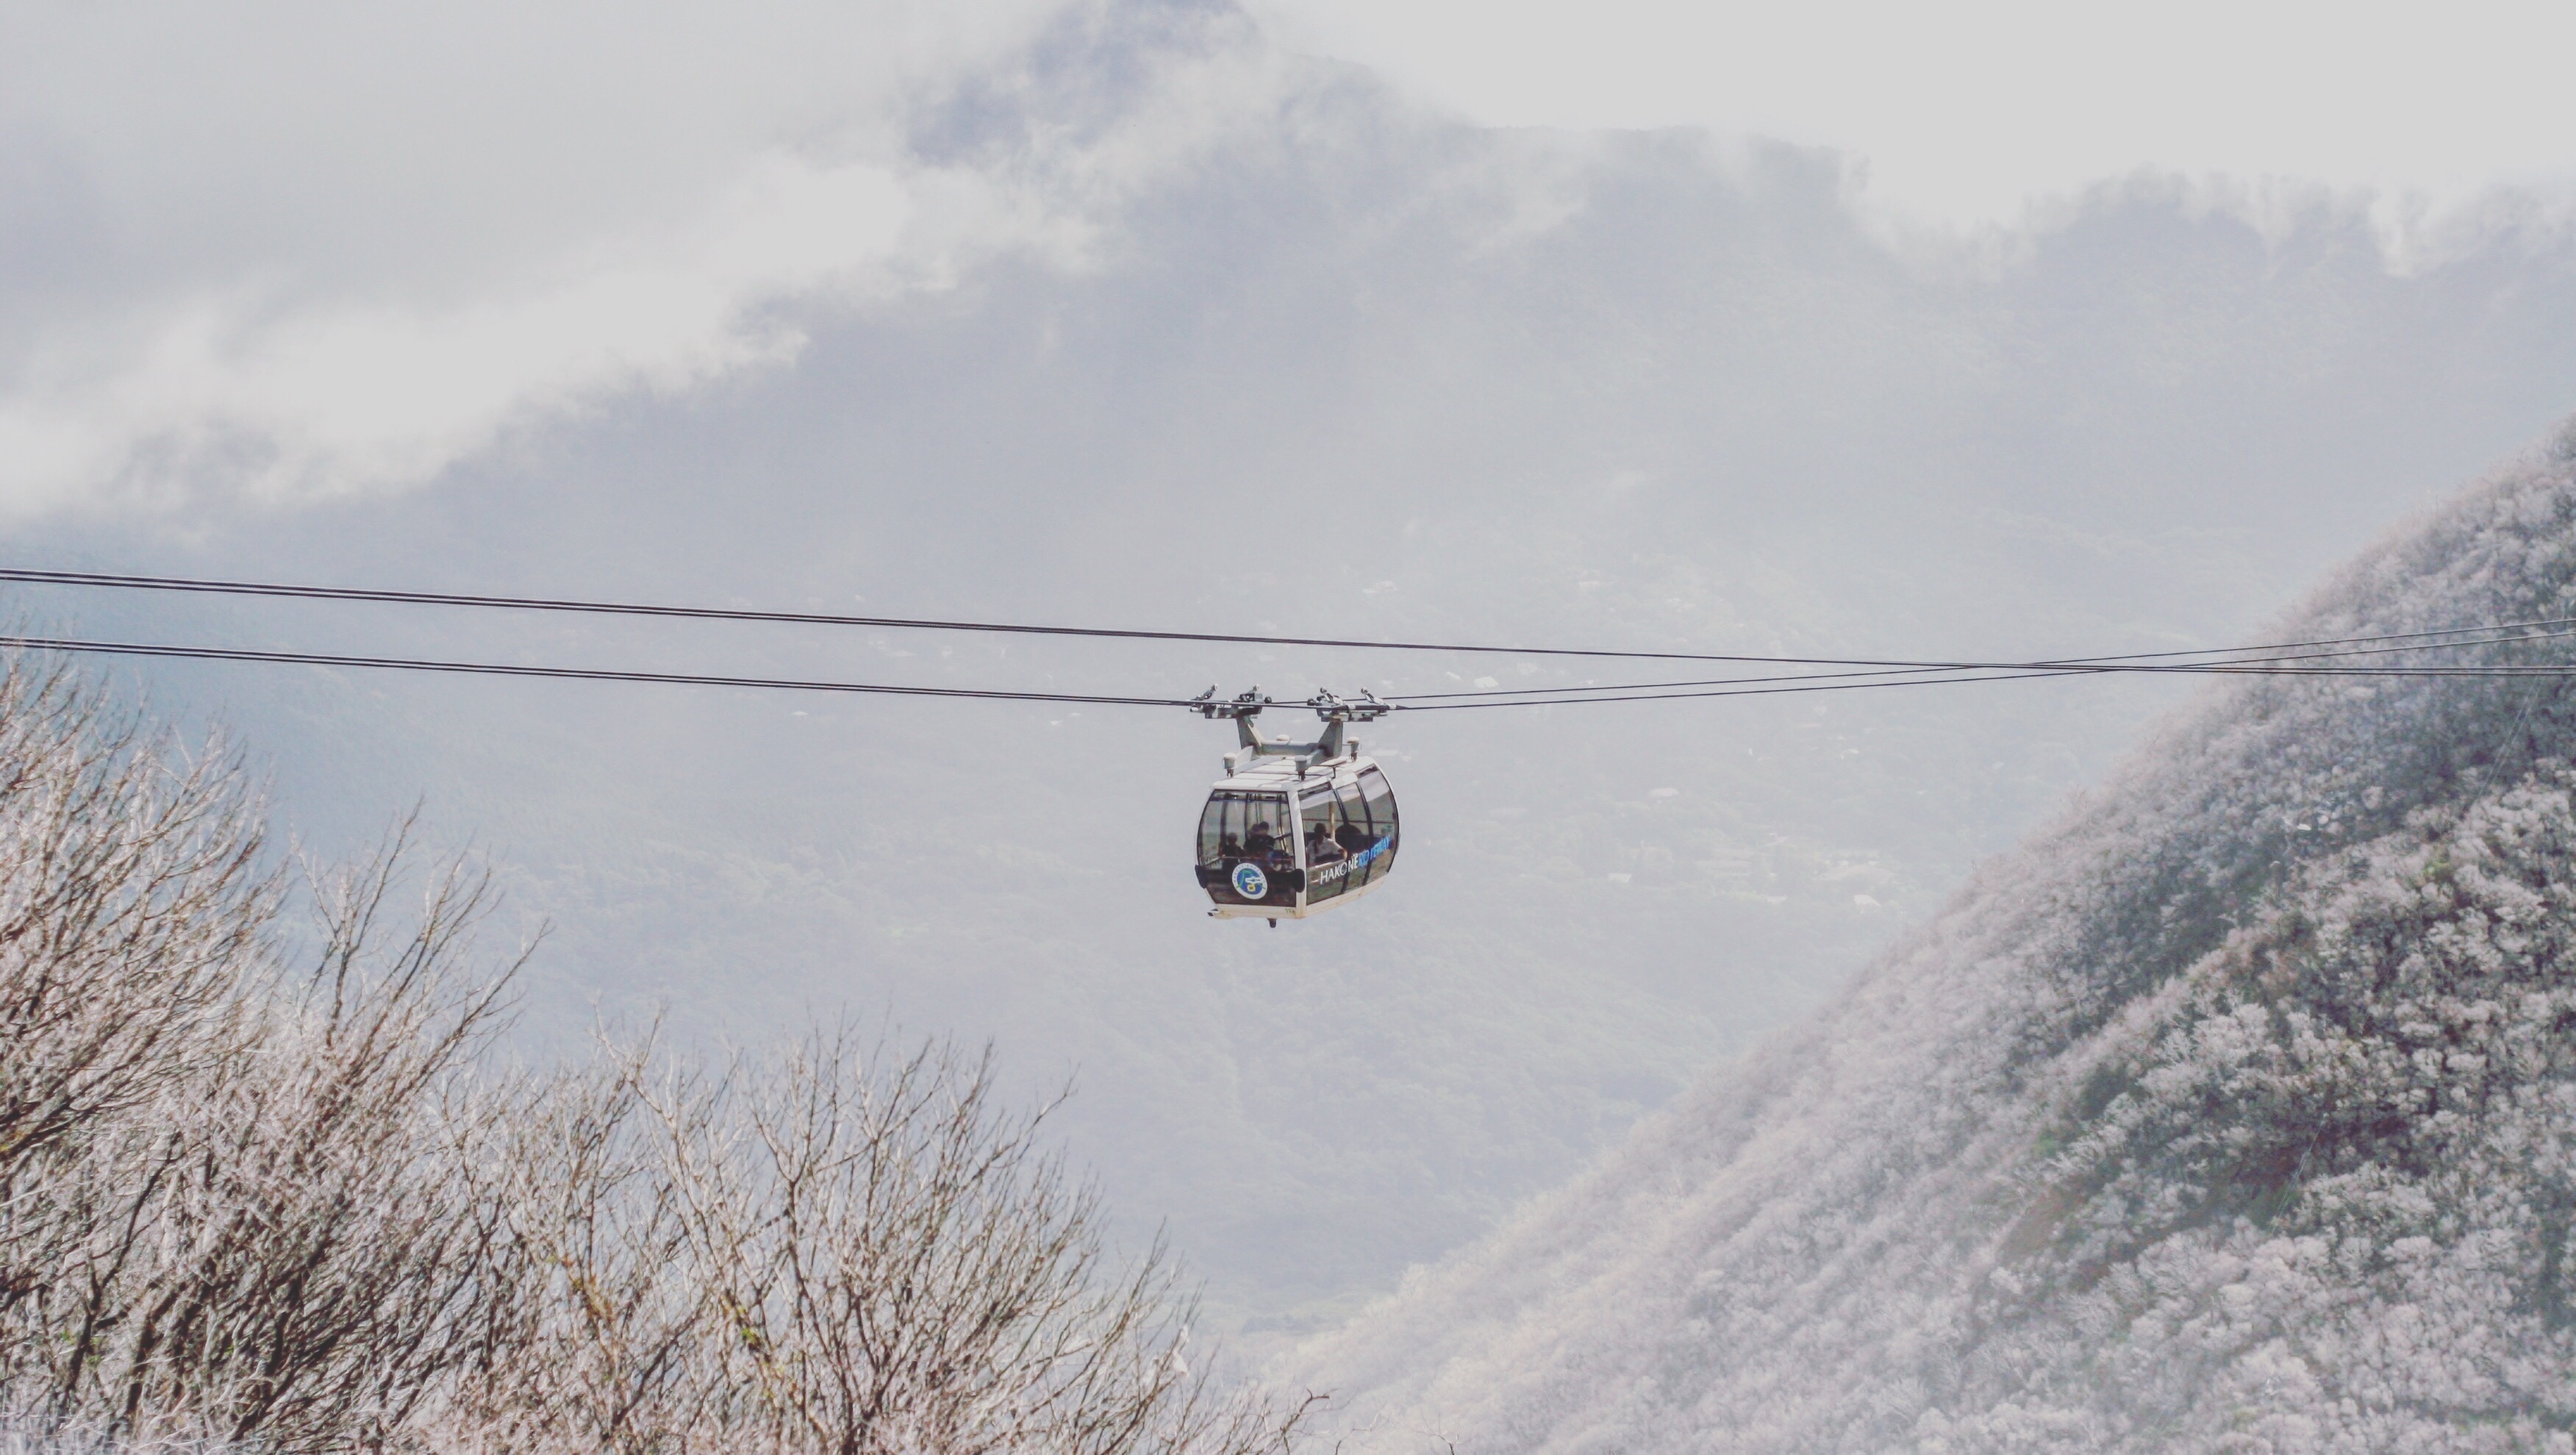 The cable car with that foggy winter-like scene.